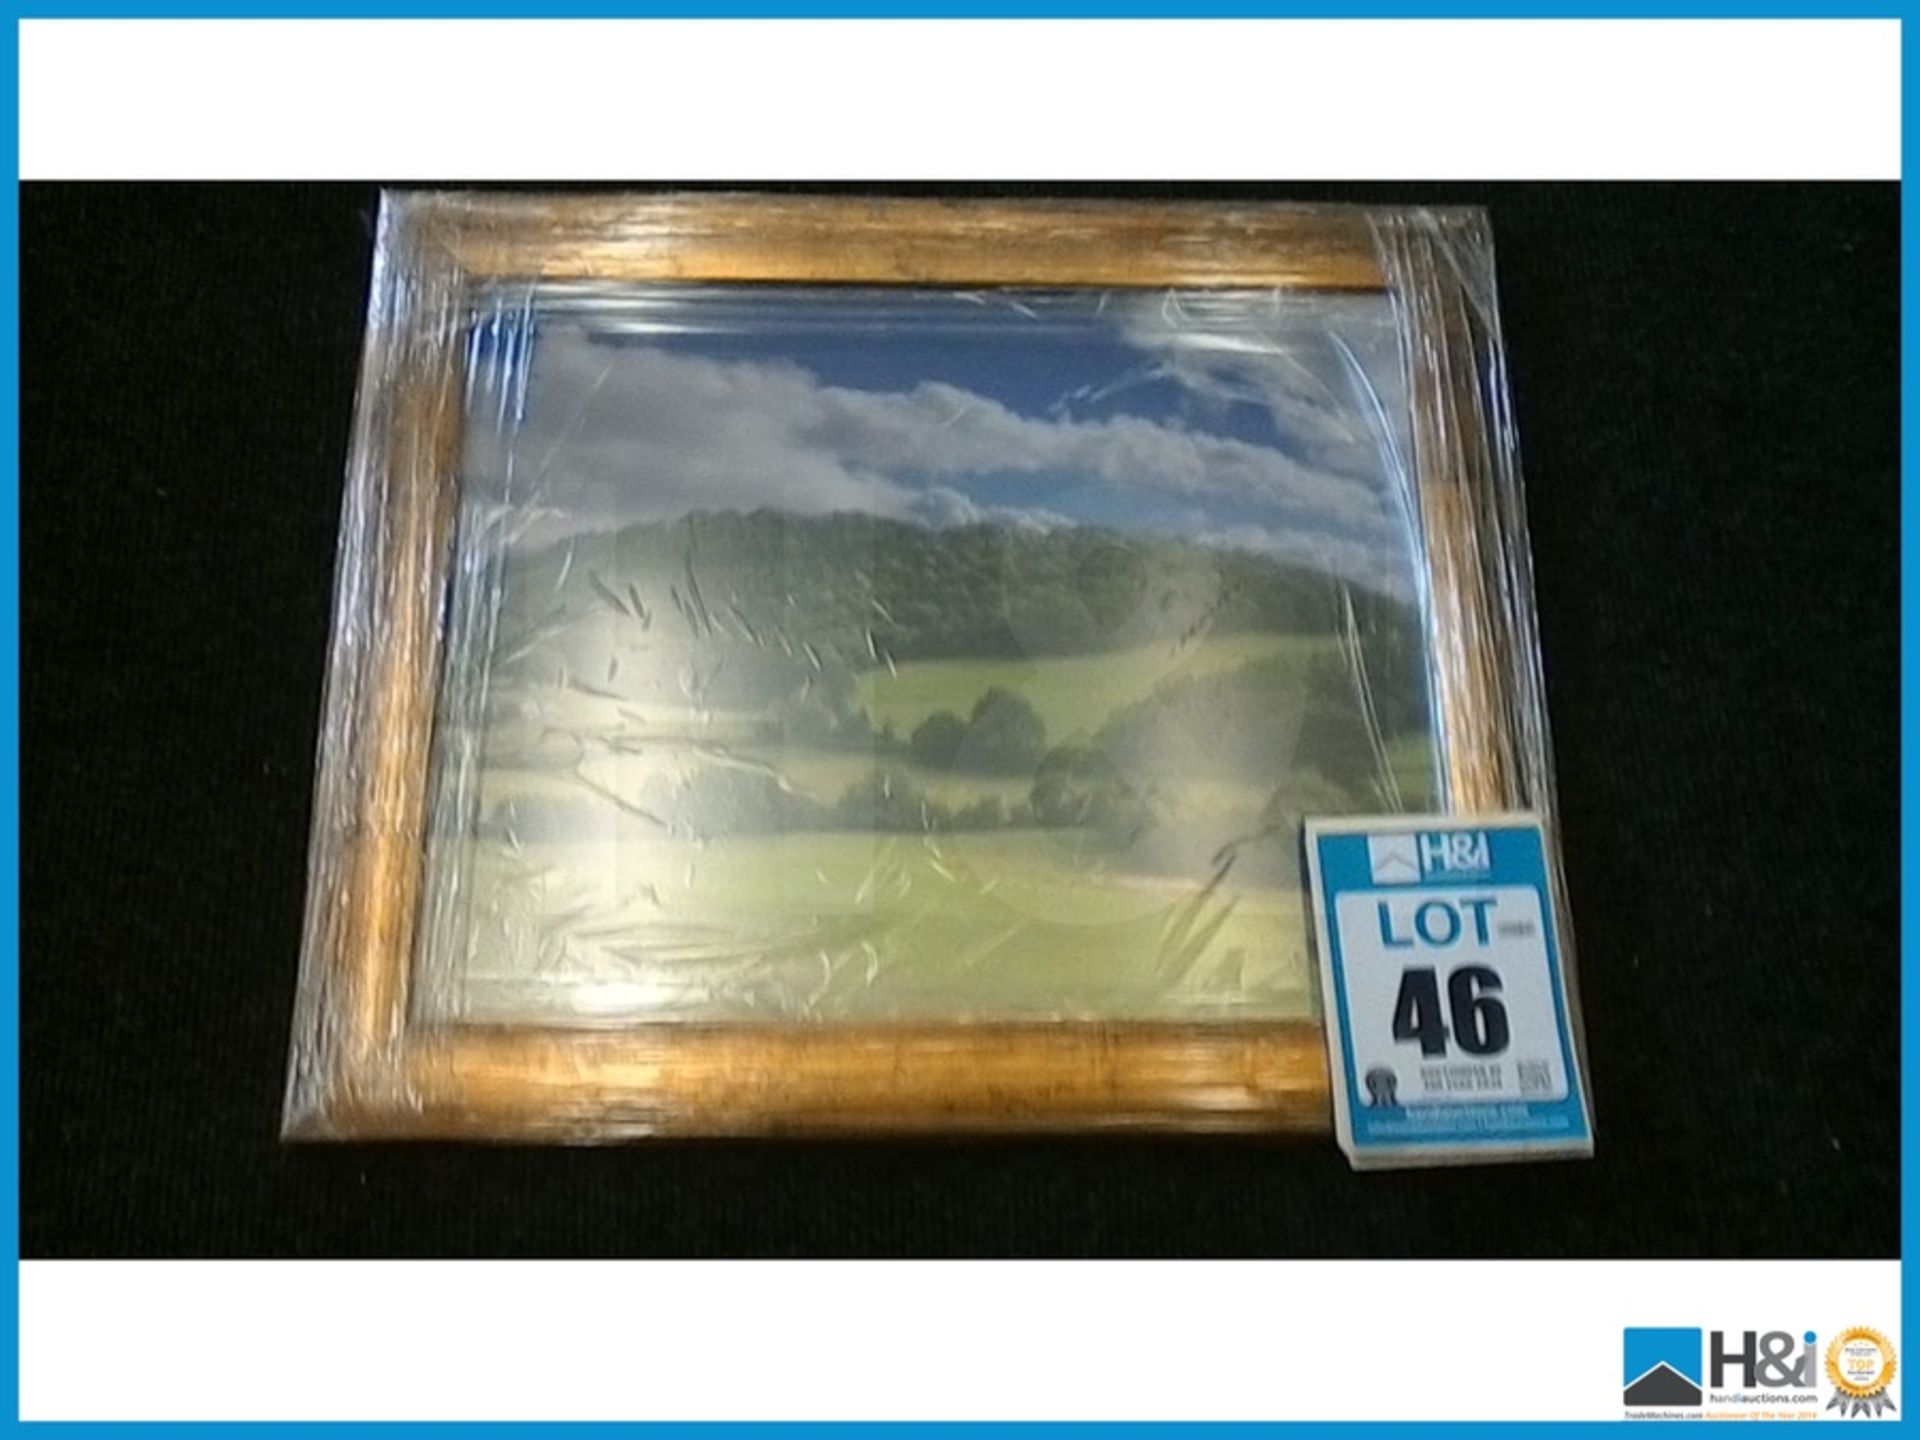 NEW DESIGNER RUSTIC COPPER METALIC FINISH FRAME DISPLAYING A LANDSCAPE DIMENSIONS: 60X50 CM RRP: £